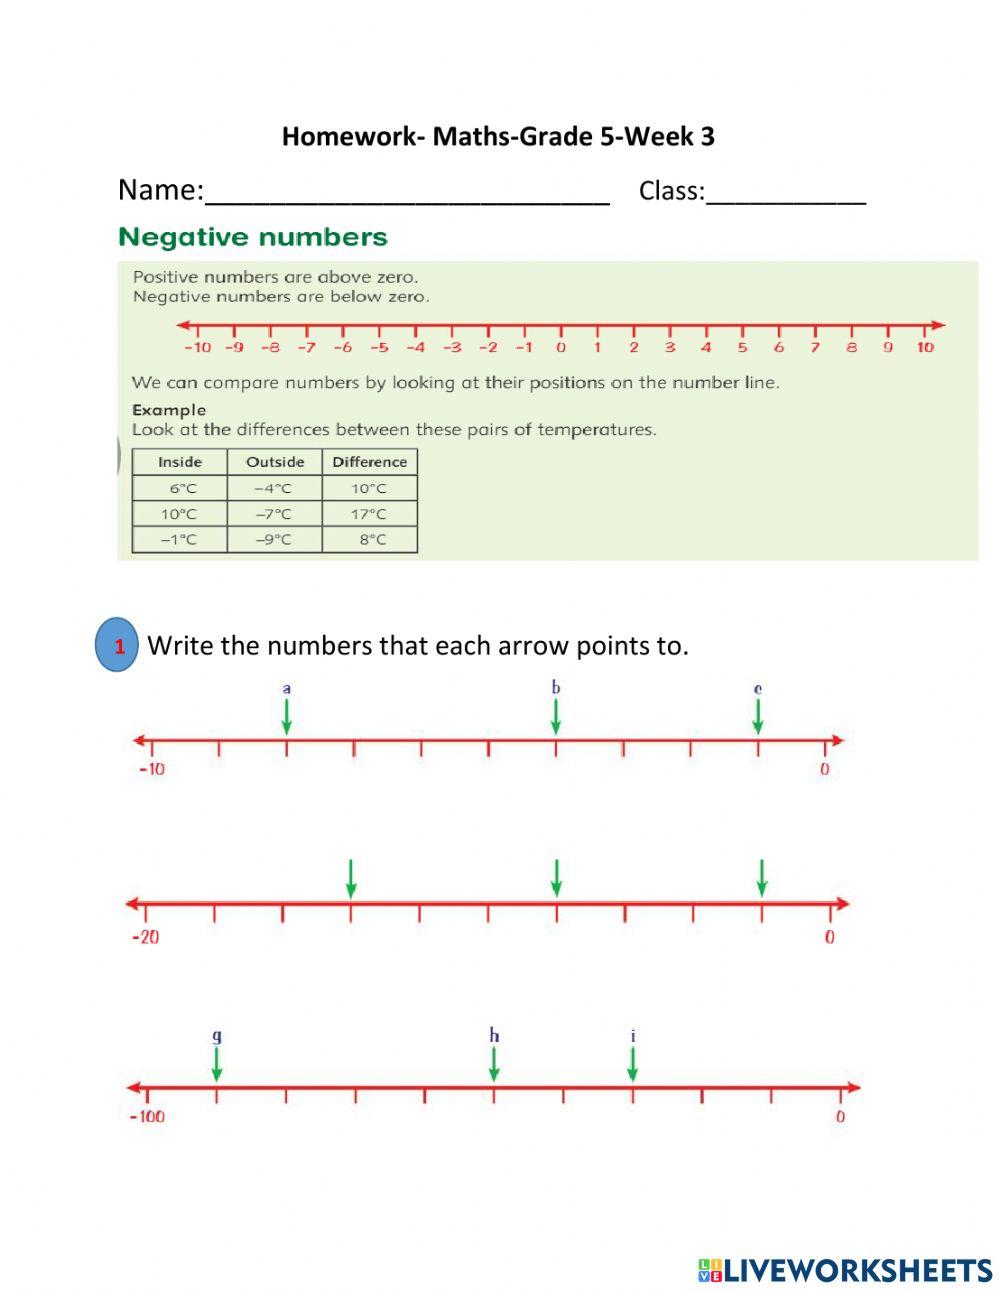 Negative numbers